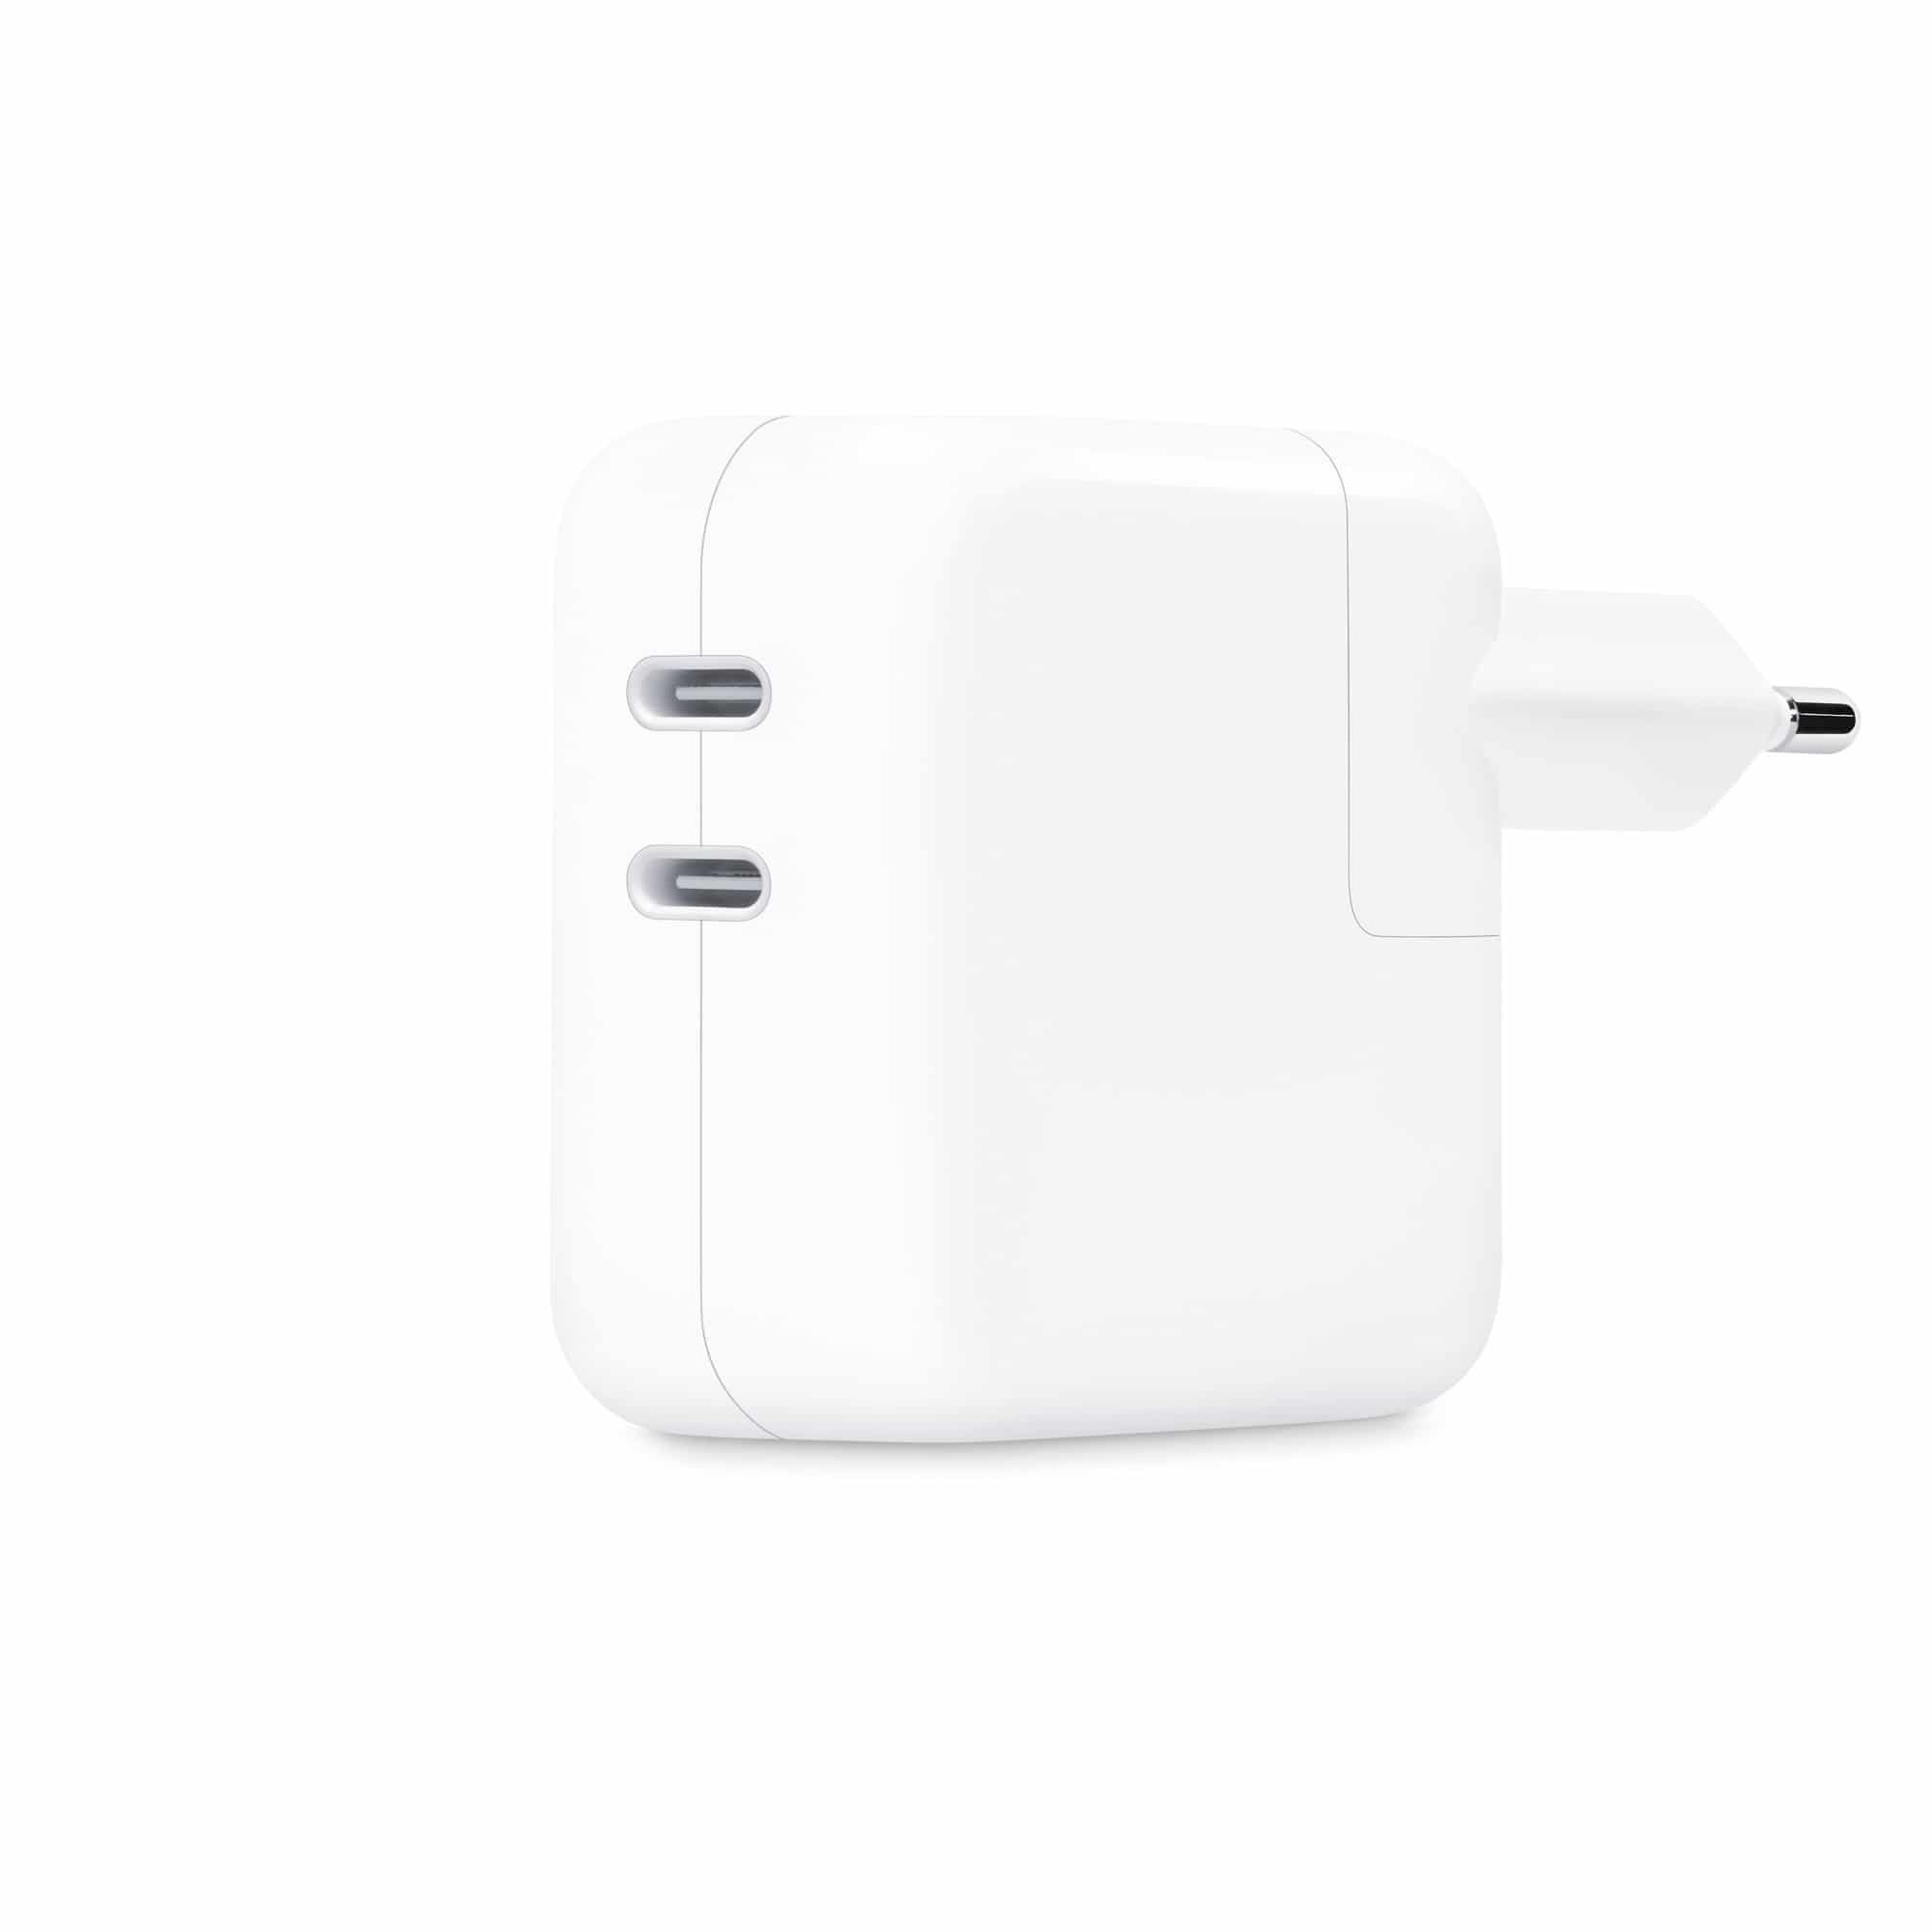 35W USB-C power adapter with two ports